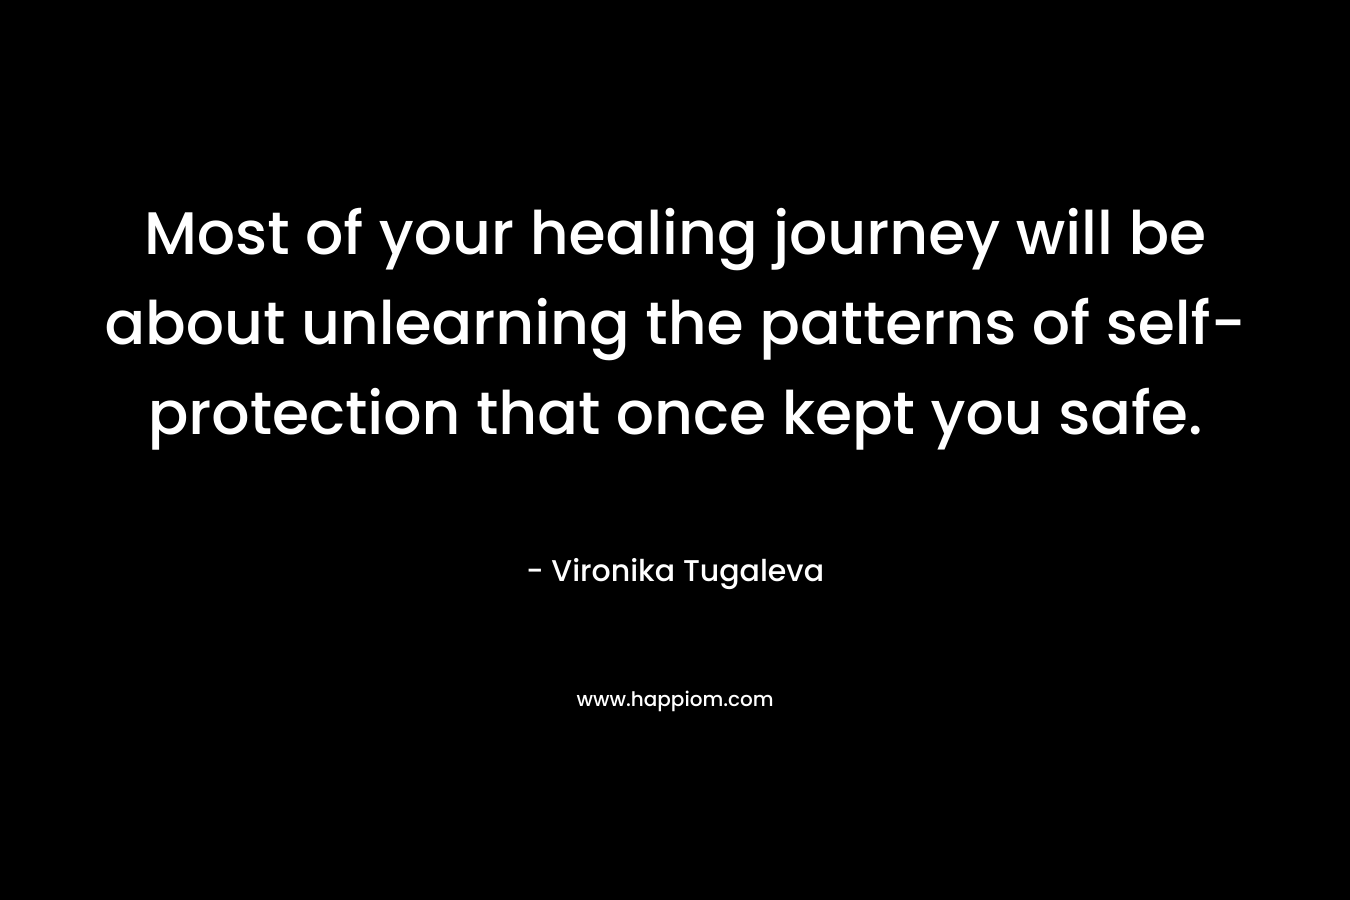 Most of your healing journey will be about unlearning the patterns of self-protection that once kept you safe. – Vironika Tugaleva